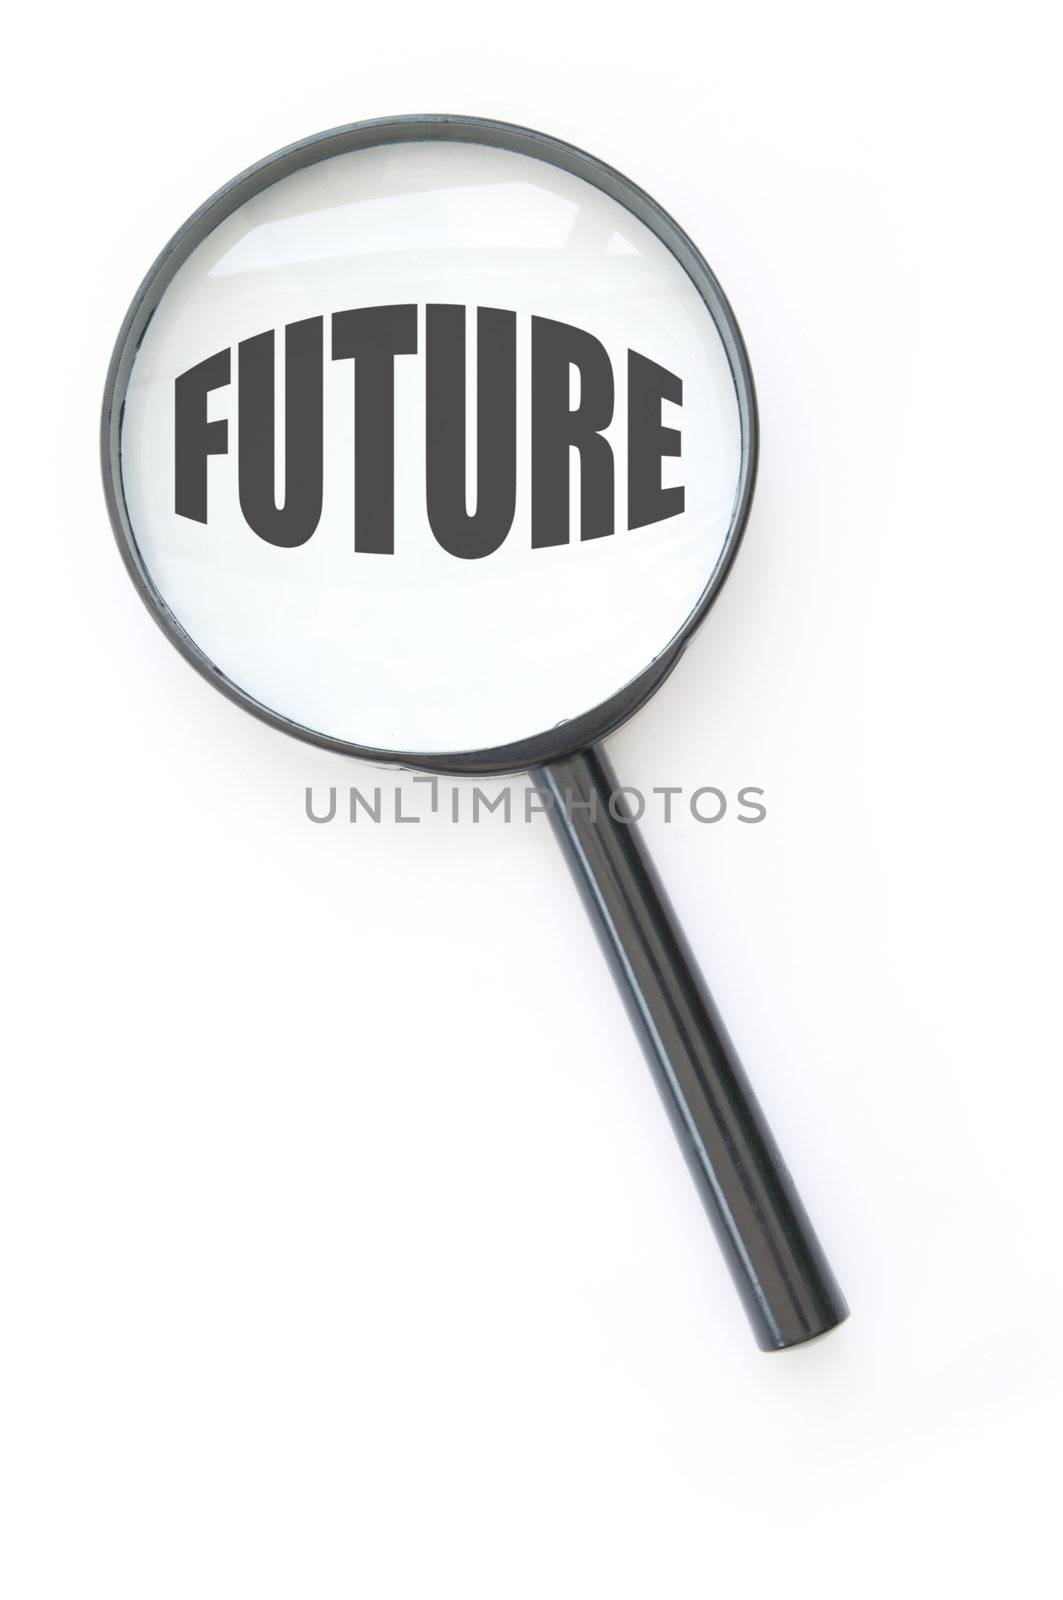 Focus on the future by unikpix